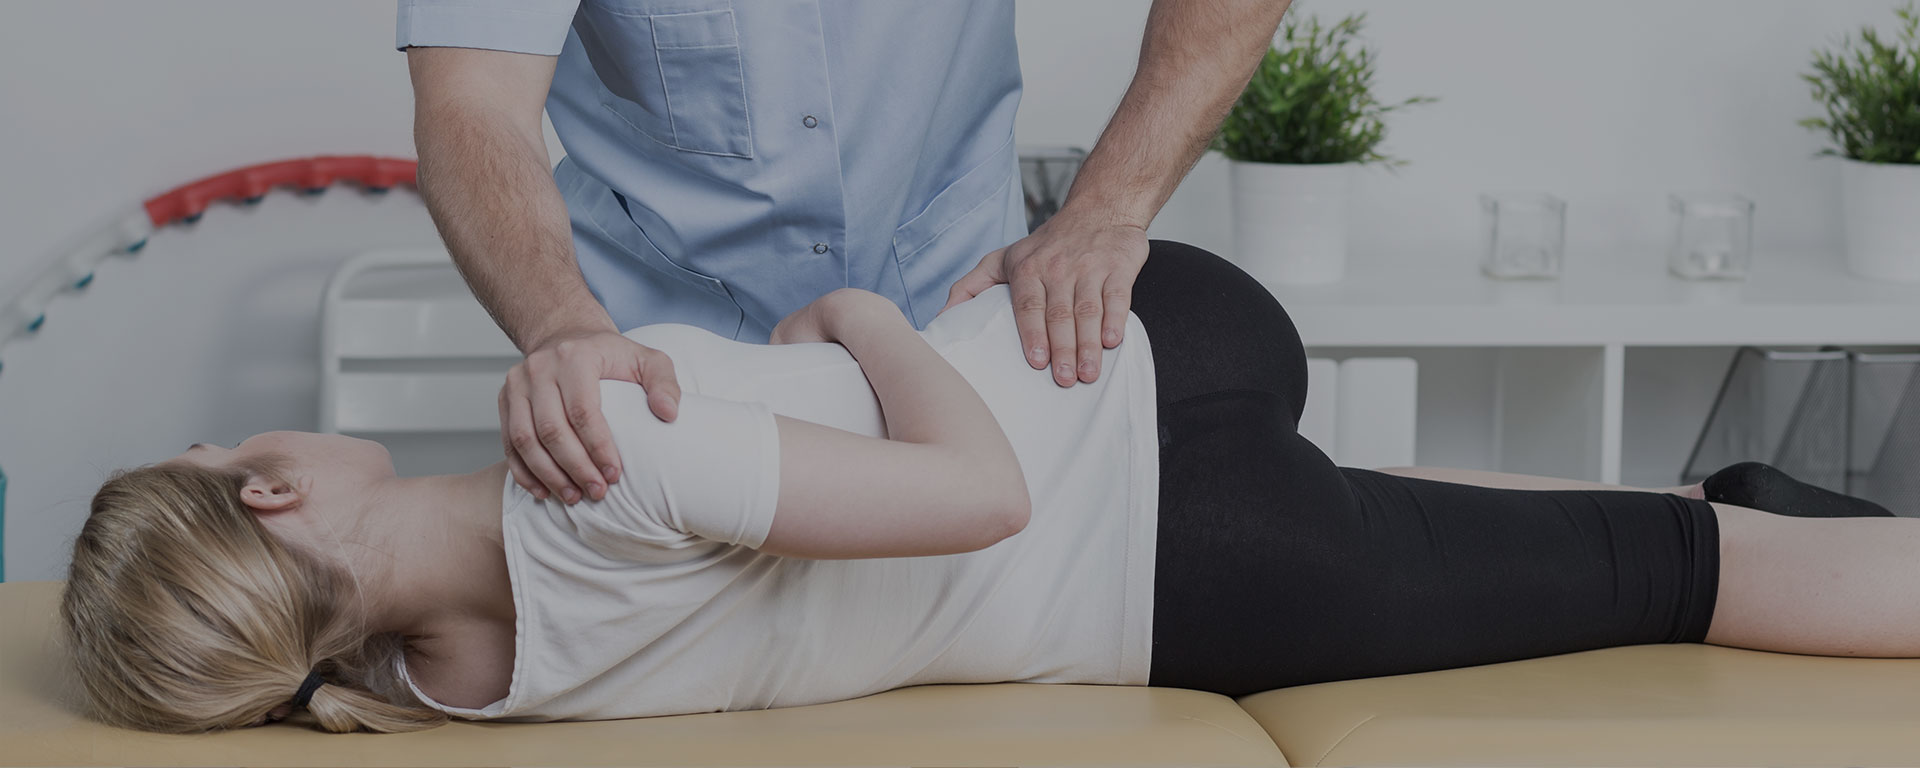 San Rafael Female patient getting a chiropractic adjustment to relieve lower back pain